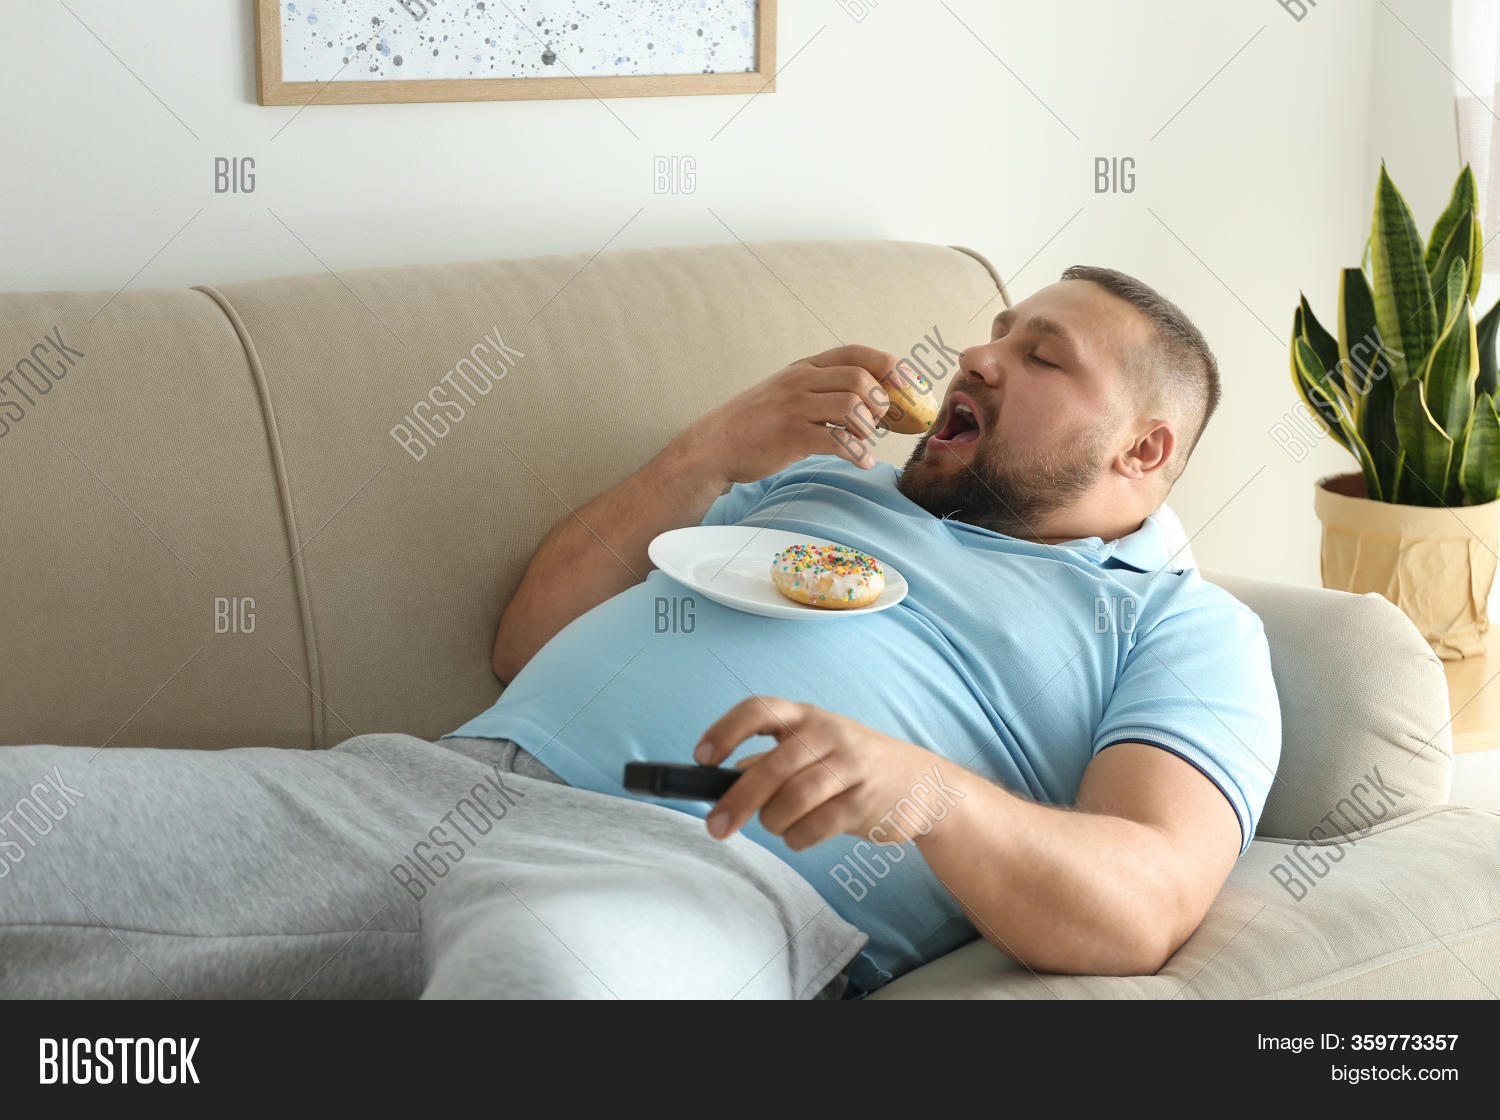 diana lunsford recommends fat guy on couch pic